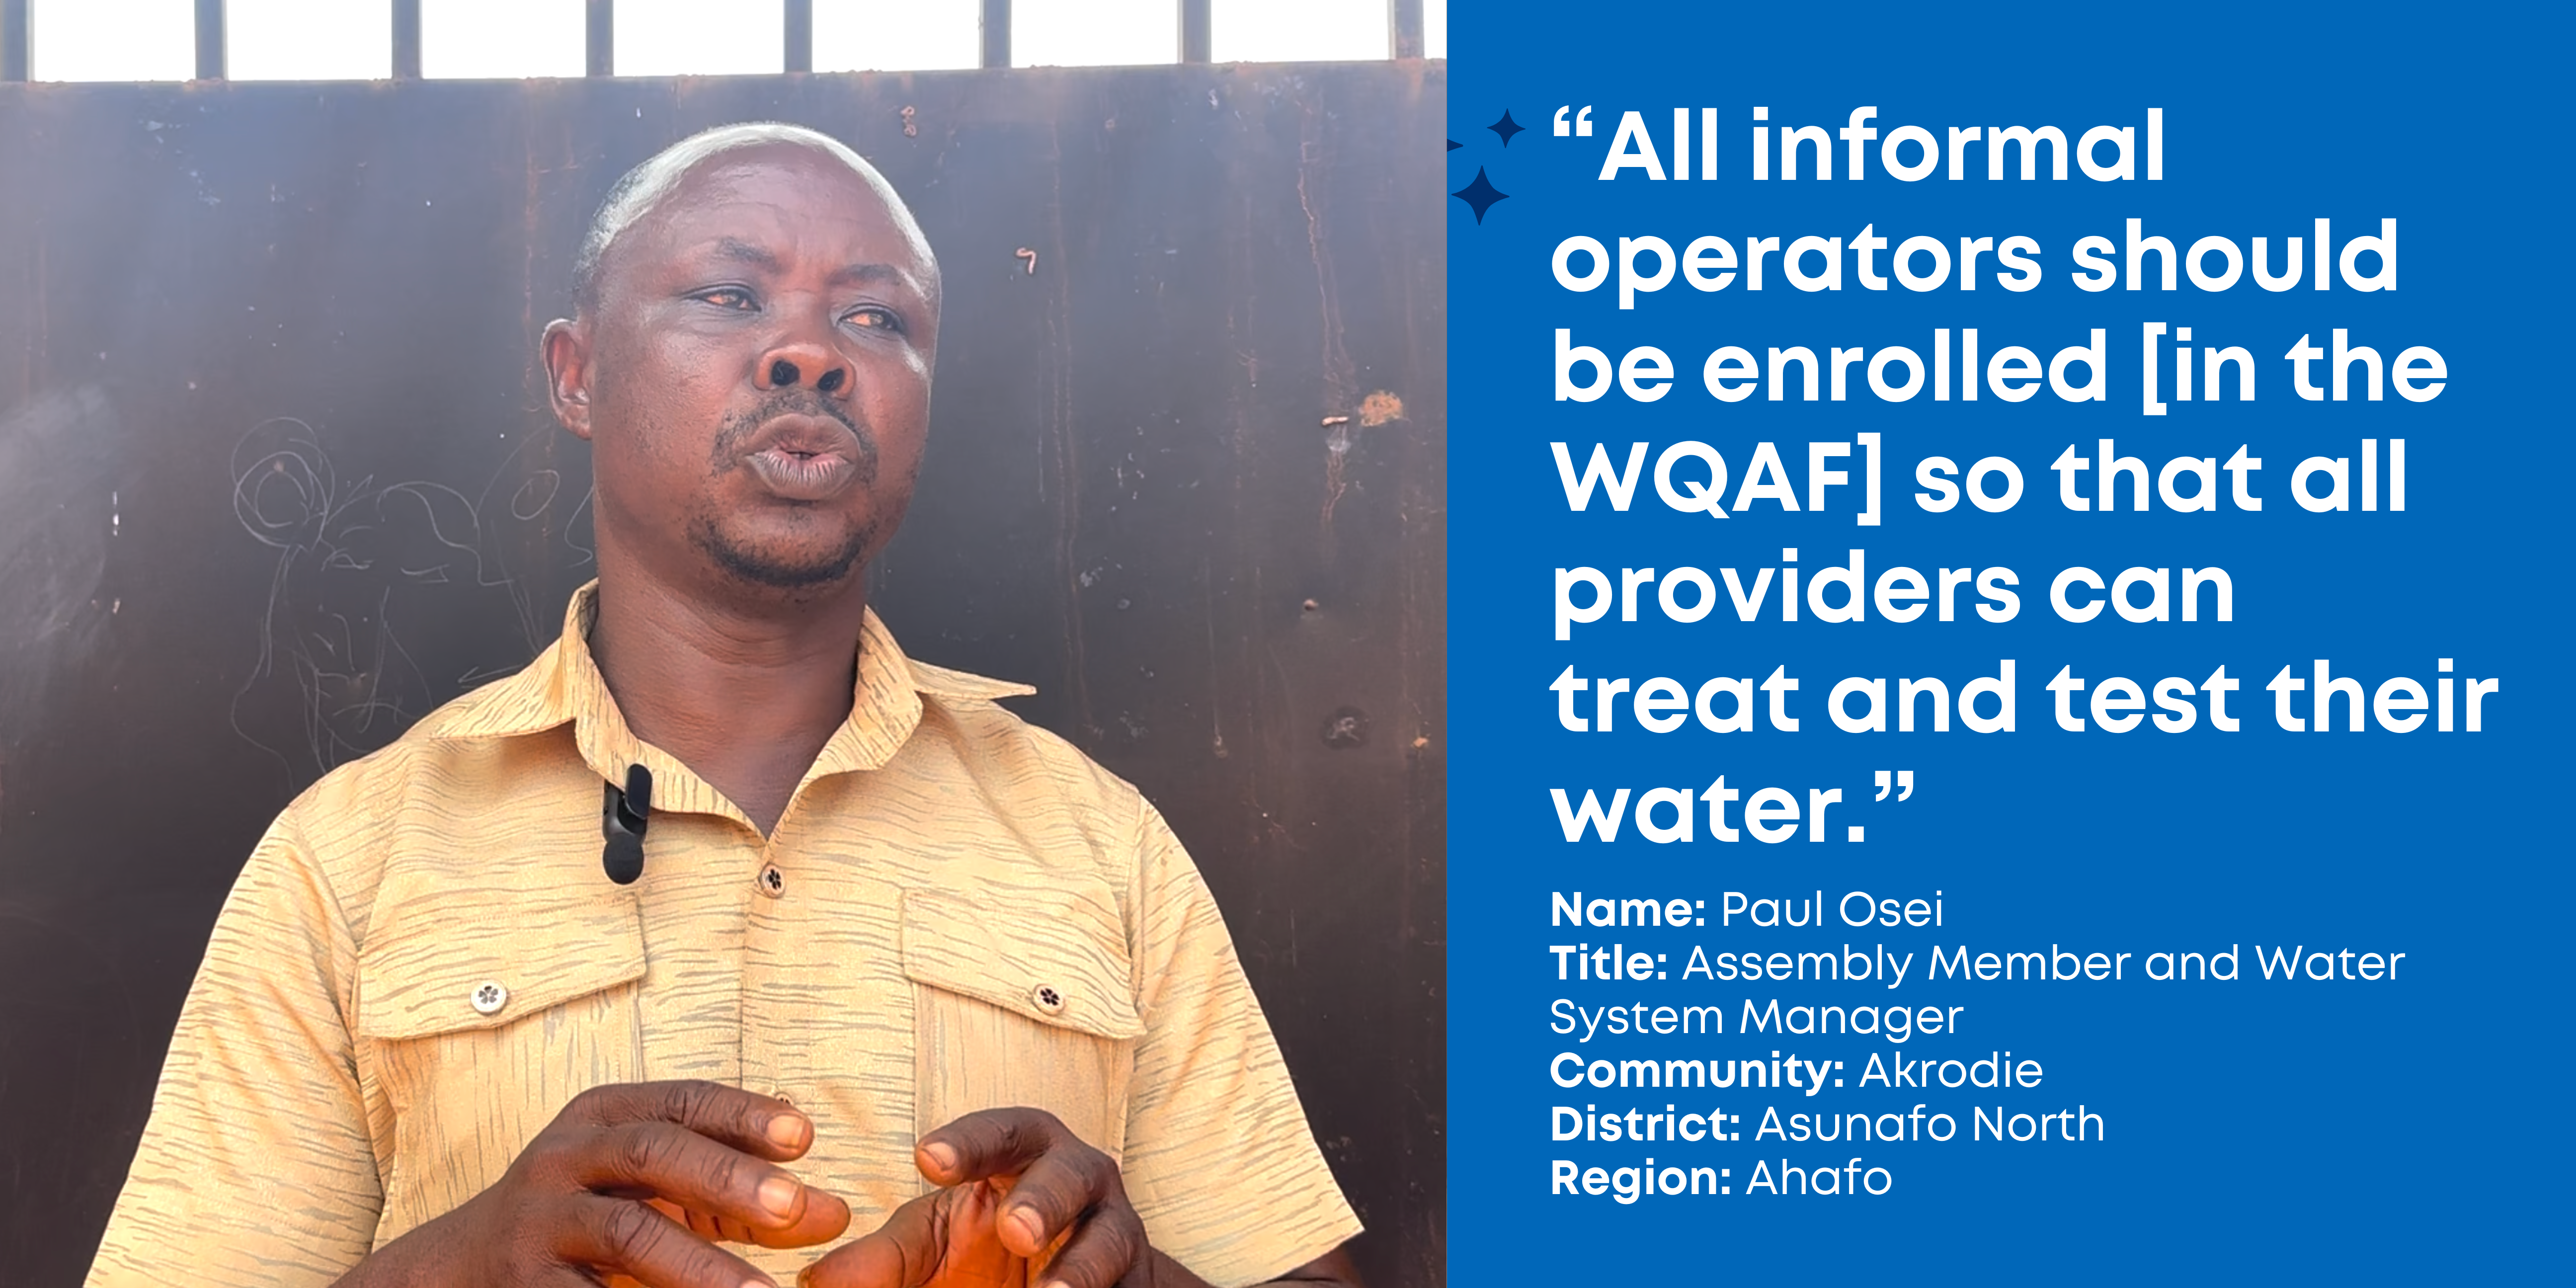 Assembly member and water system manager, Paul Osei wears a yellow collared short-sleeved shirt and gestures with his hands: "All informal operators should be enrolled [in the WQAF] so that all providers can treat and test their water." Asunafo North, Ahafo